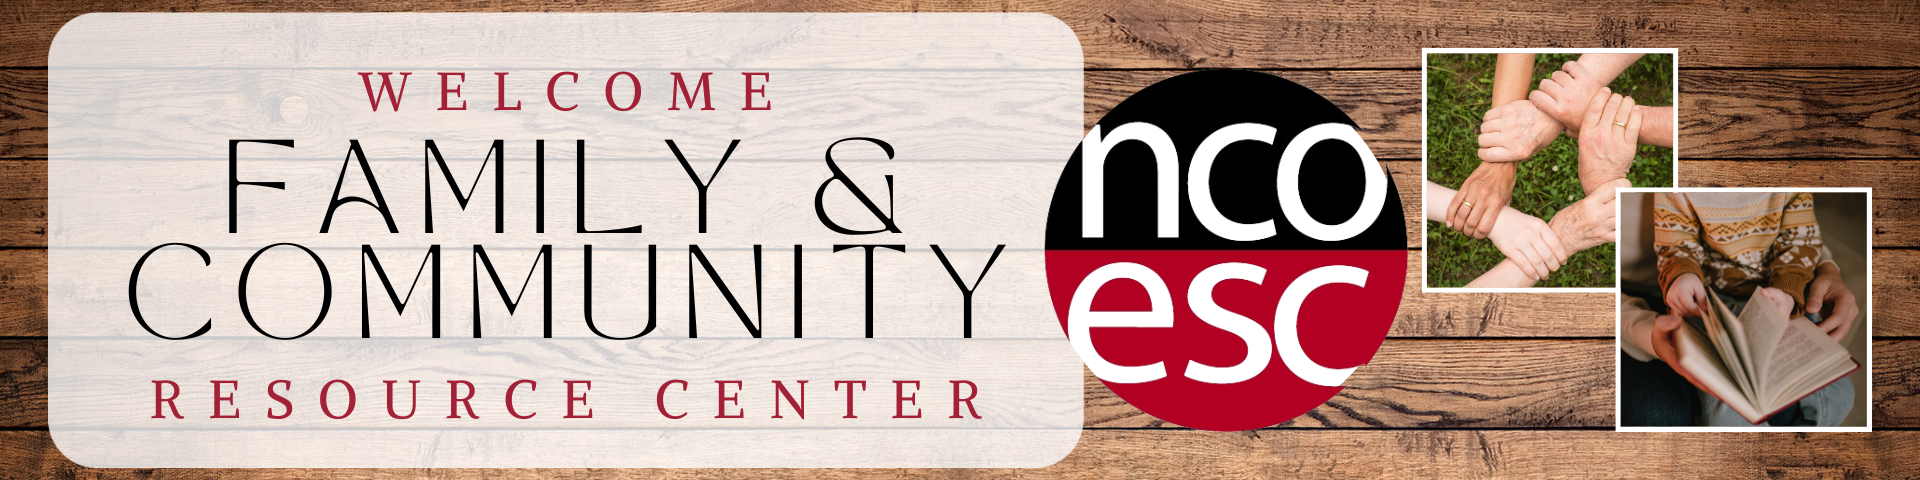 Welcome to the NCOESC Family & Community Resource Center